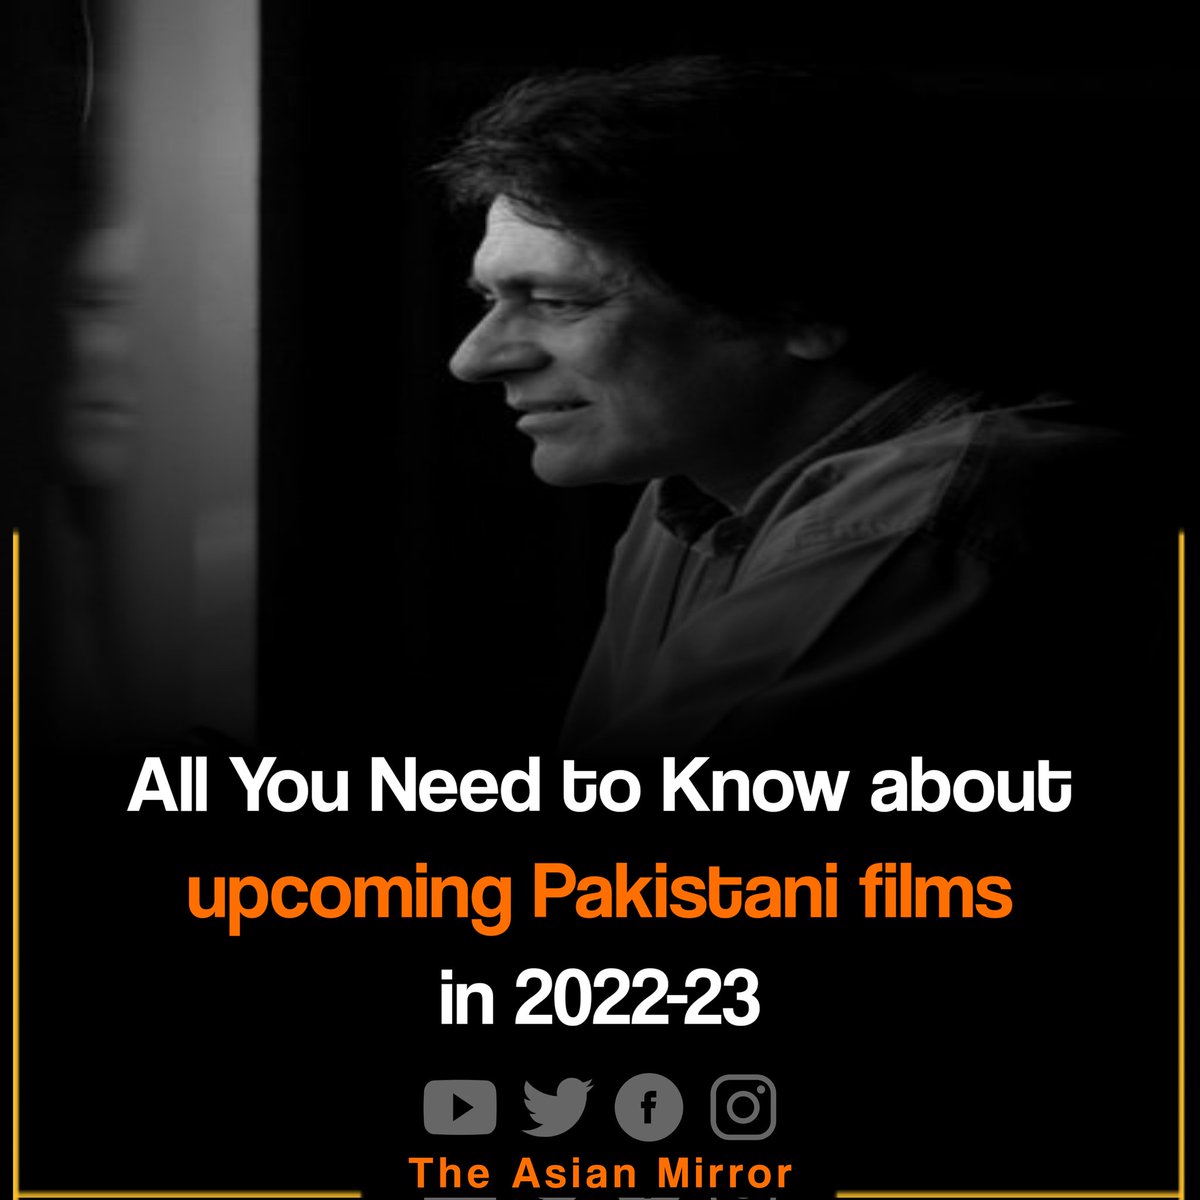 ⚡ Upcoming Pakistani Films ⚡

Read more:
theasianmirror.com/news/15852/all…

#Pakistanifilms #lollywood #films #movies #pakistankmovies #upcomingfilms #TheAsianMirror